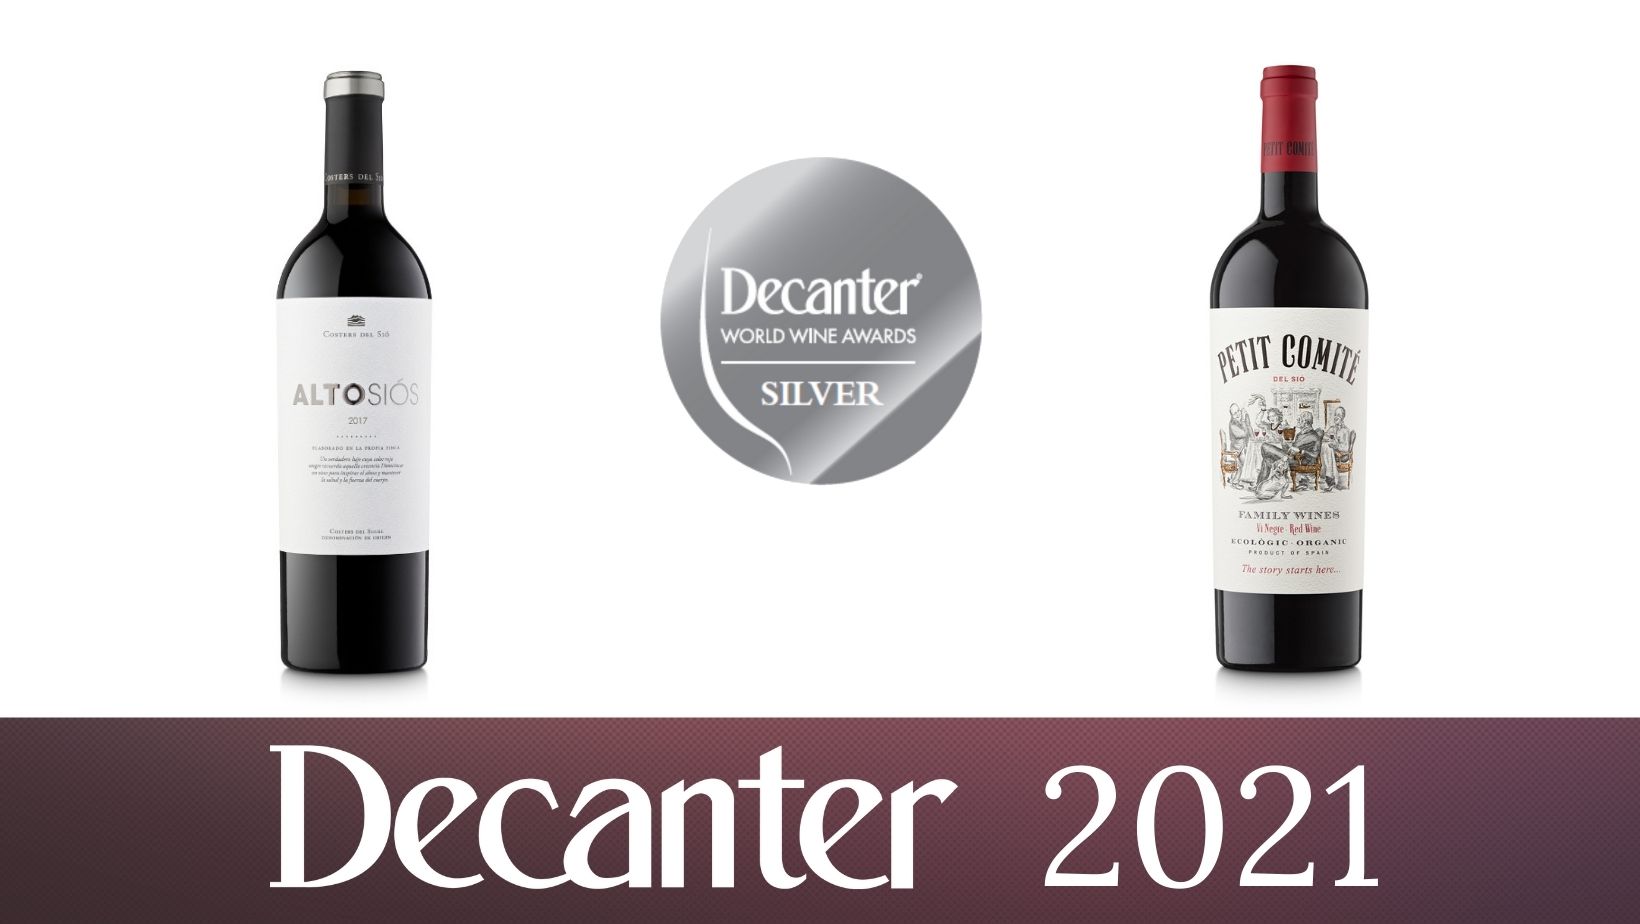 Decanter Awards 2021: 8 awarded wines